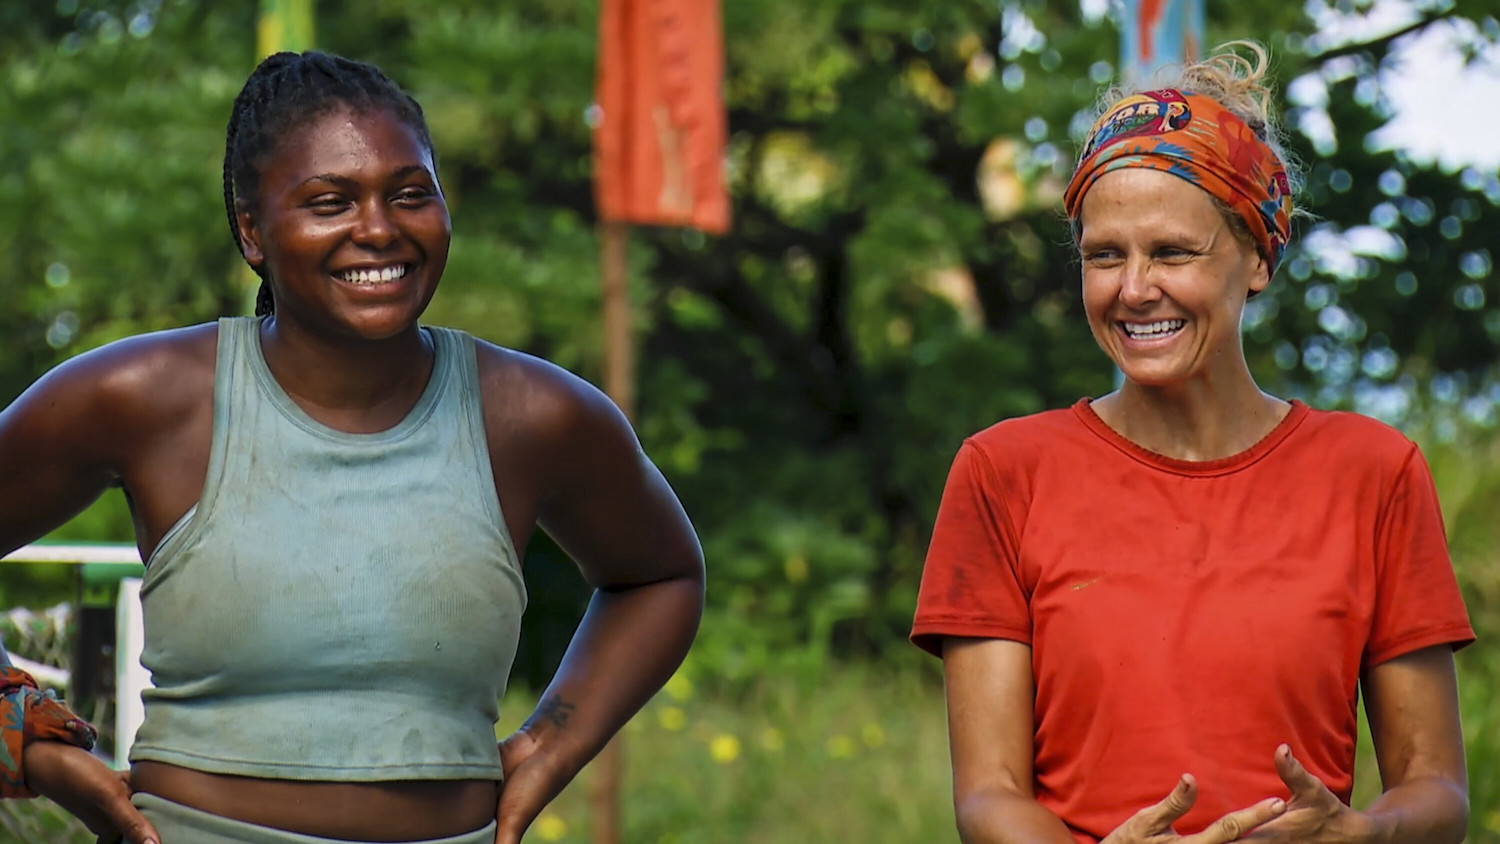 Katurah Topps and Julie Alley, two finalists in 'Survivor' Season 45